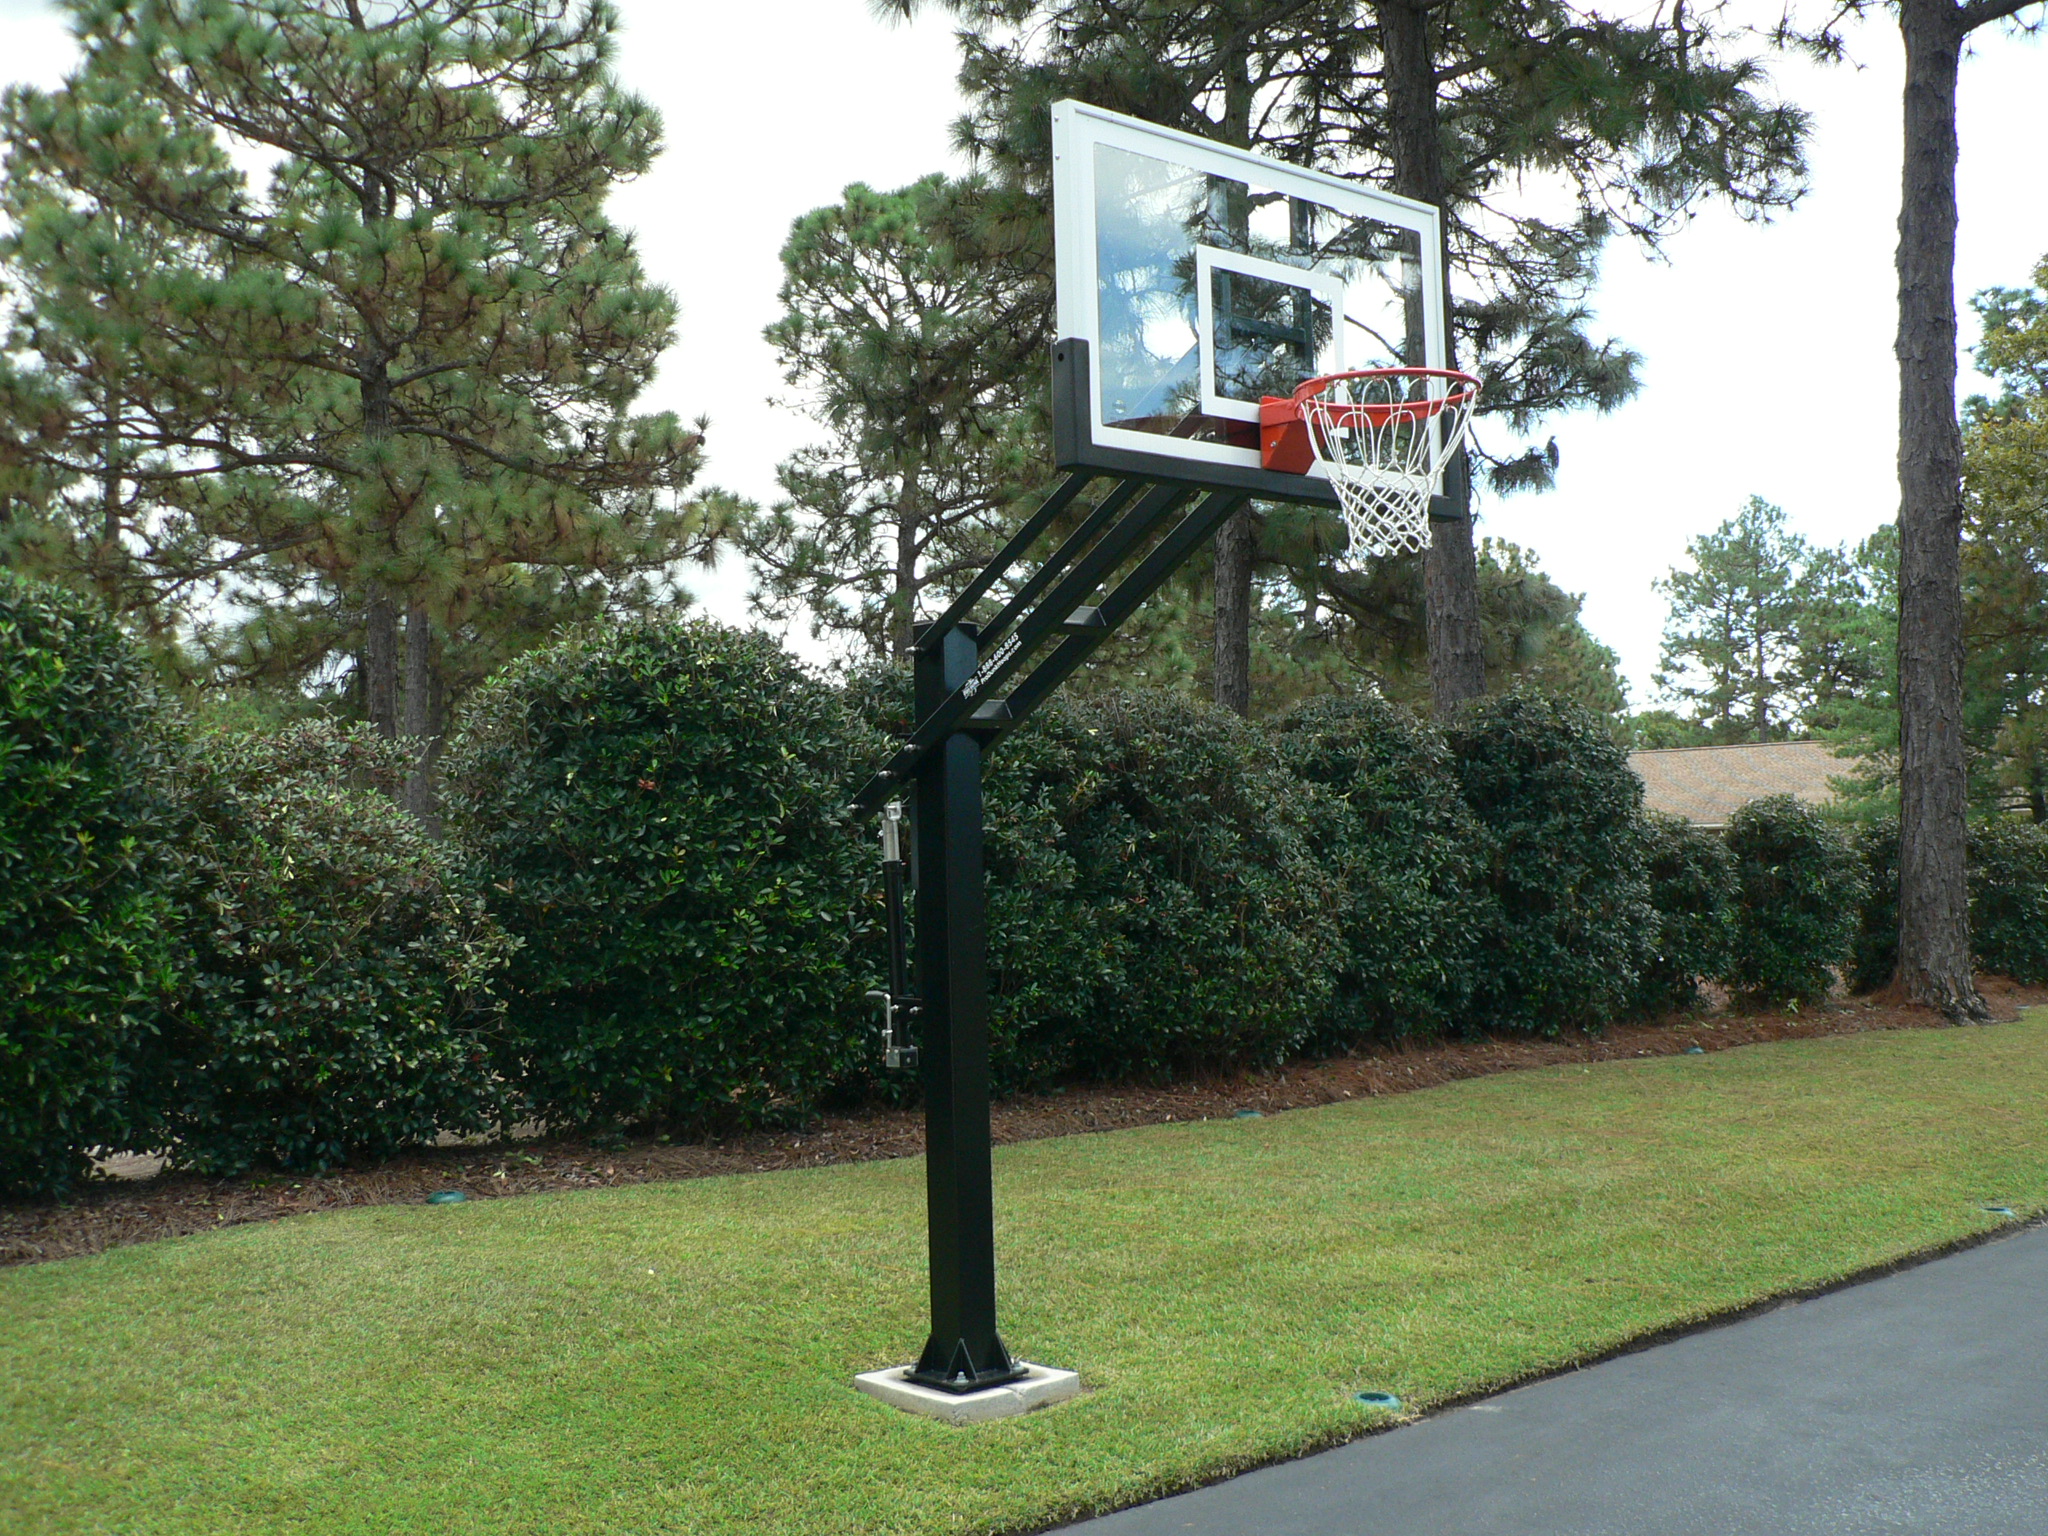 There is an angled side shot of the hoop.